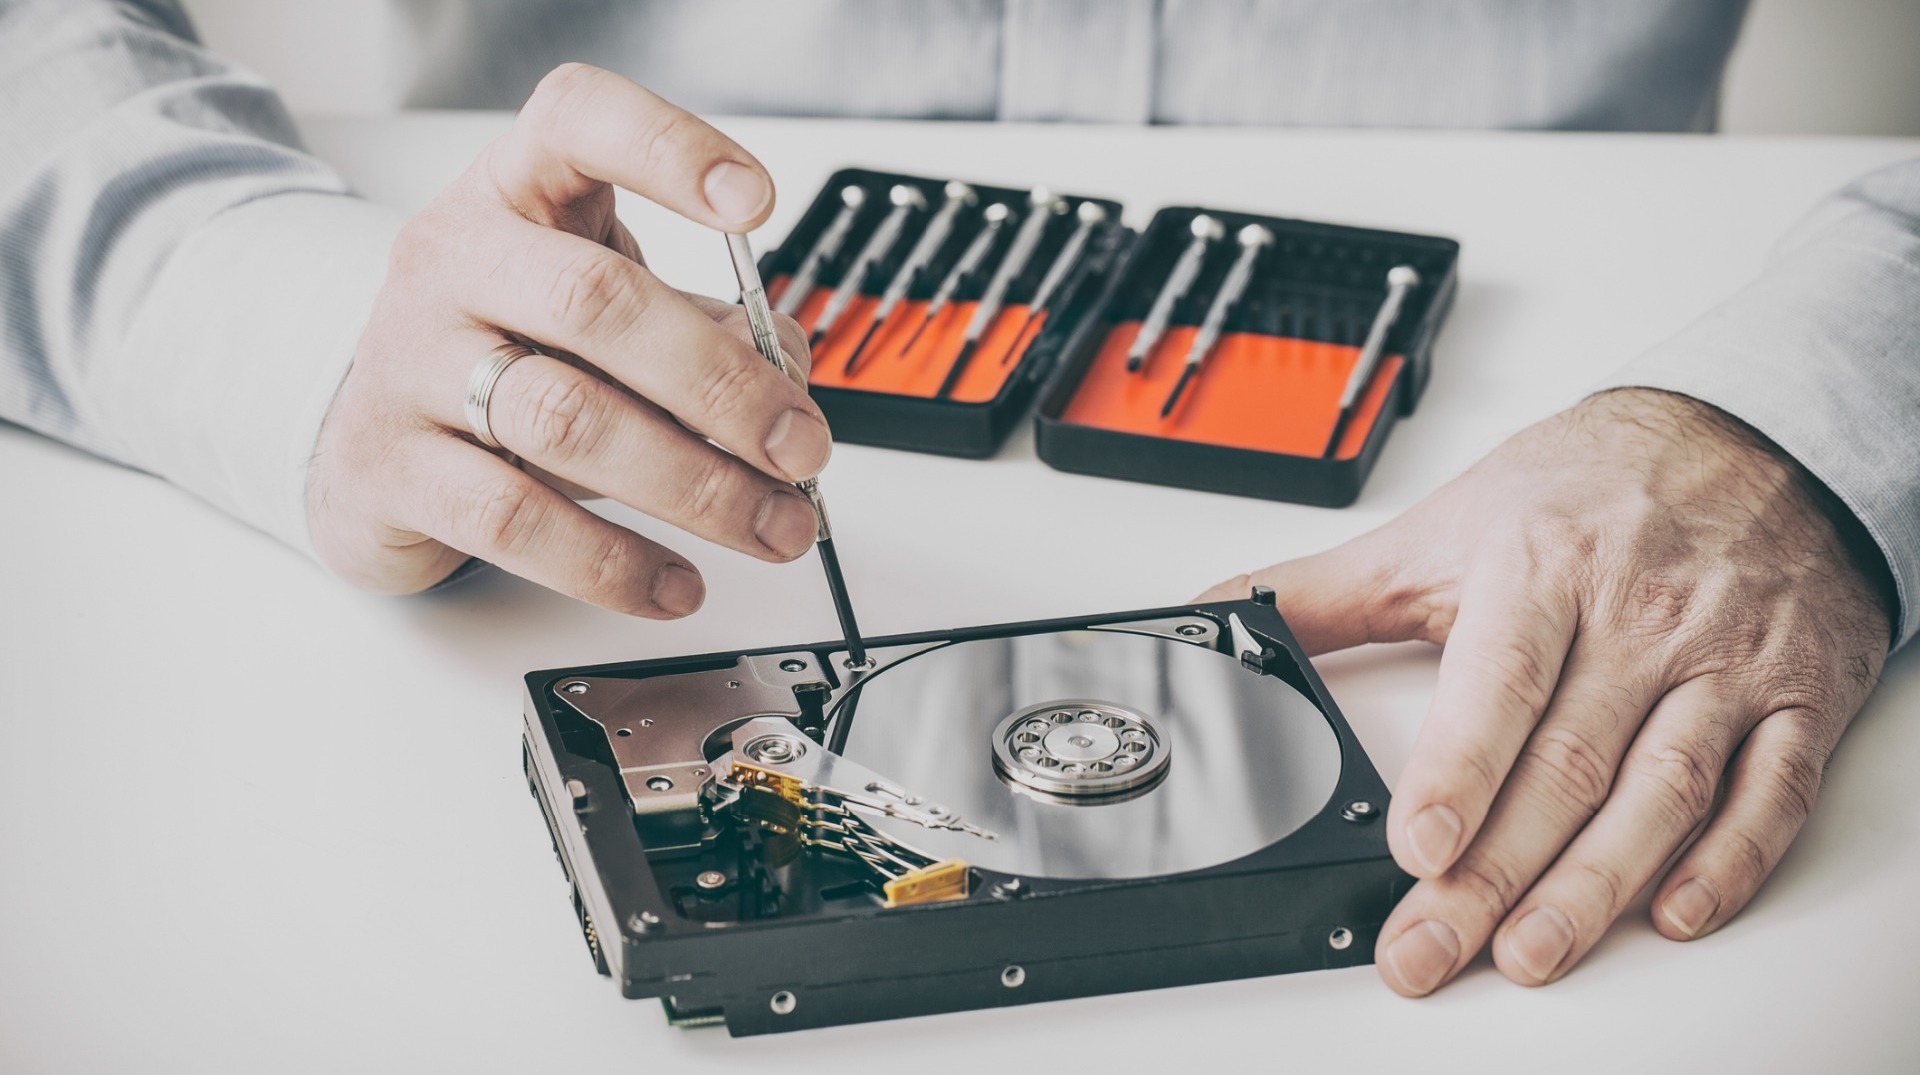 What is the single most important part of data recovery?